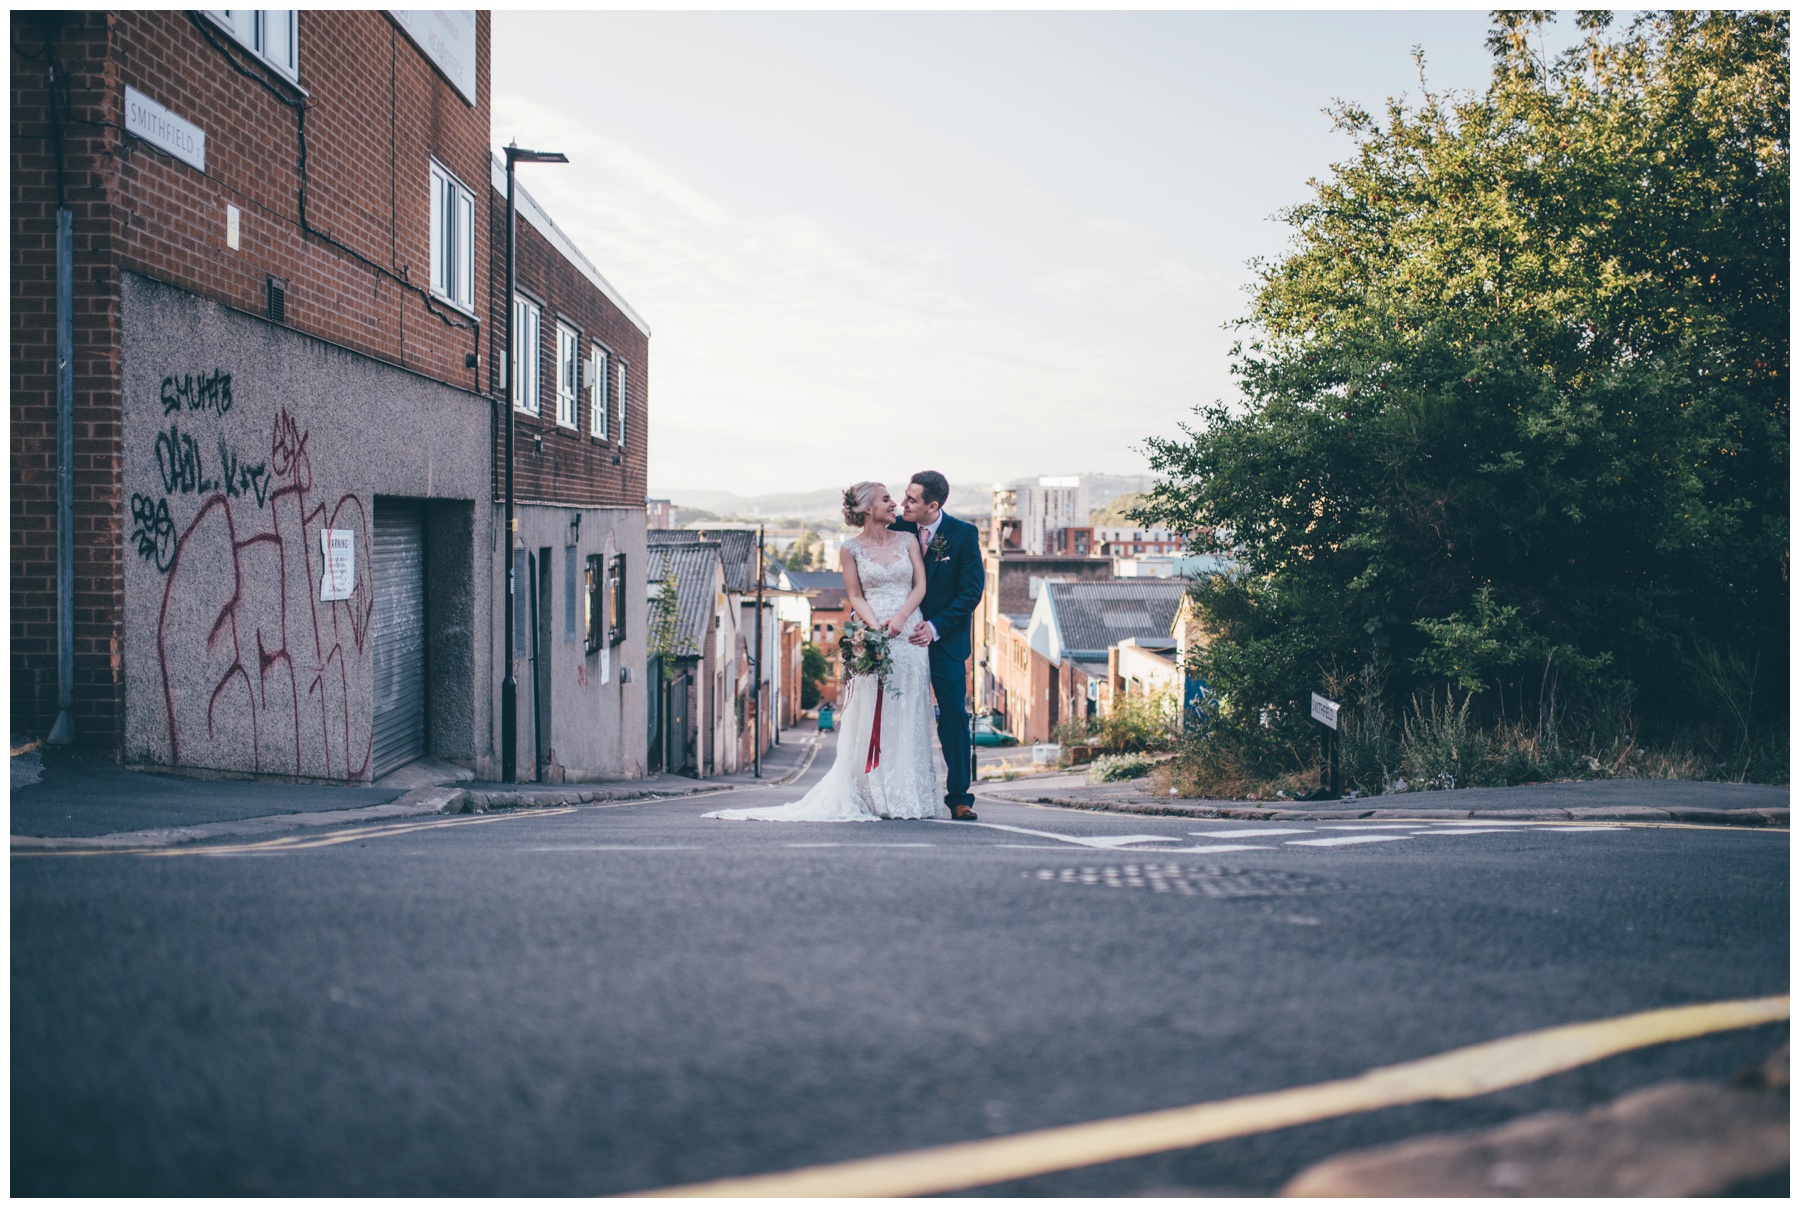 Bride and groom explore the city centre of Sheffield surround The Hide, their cool wedding venue.